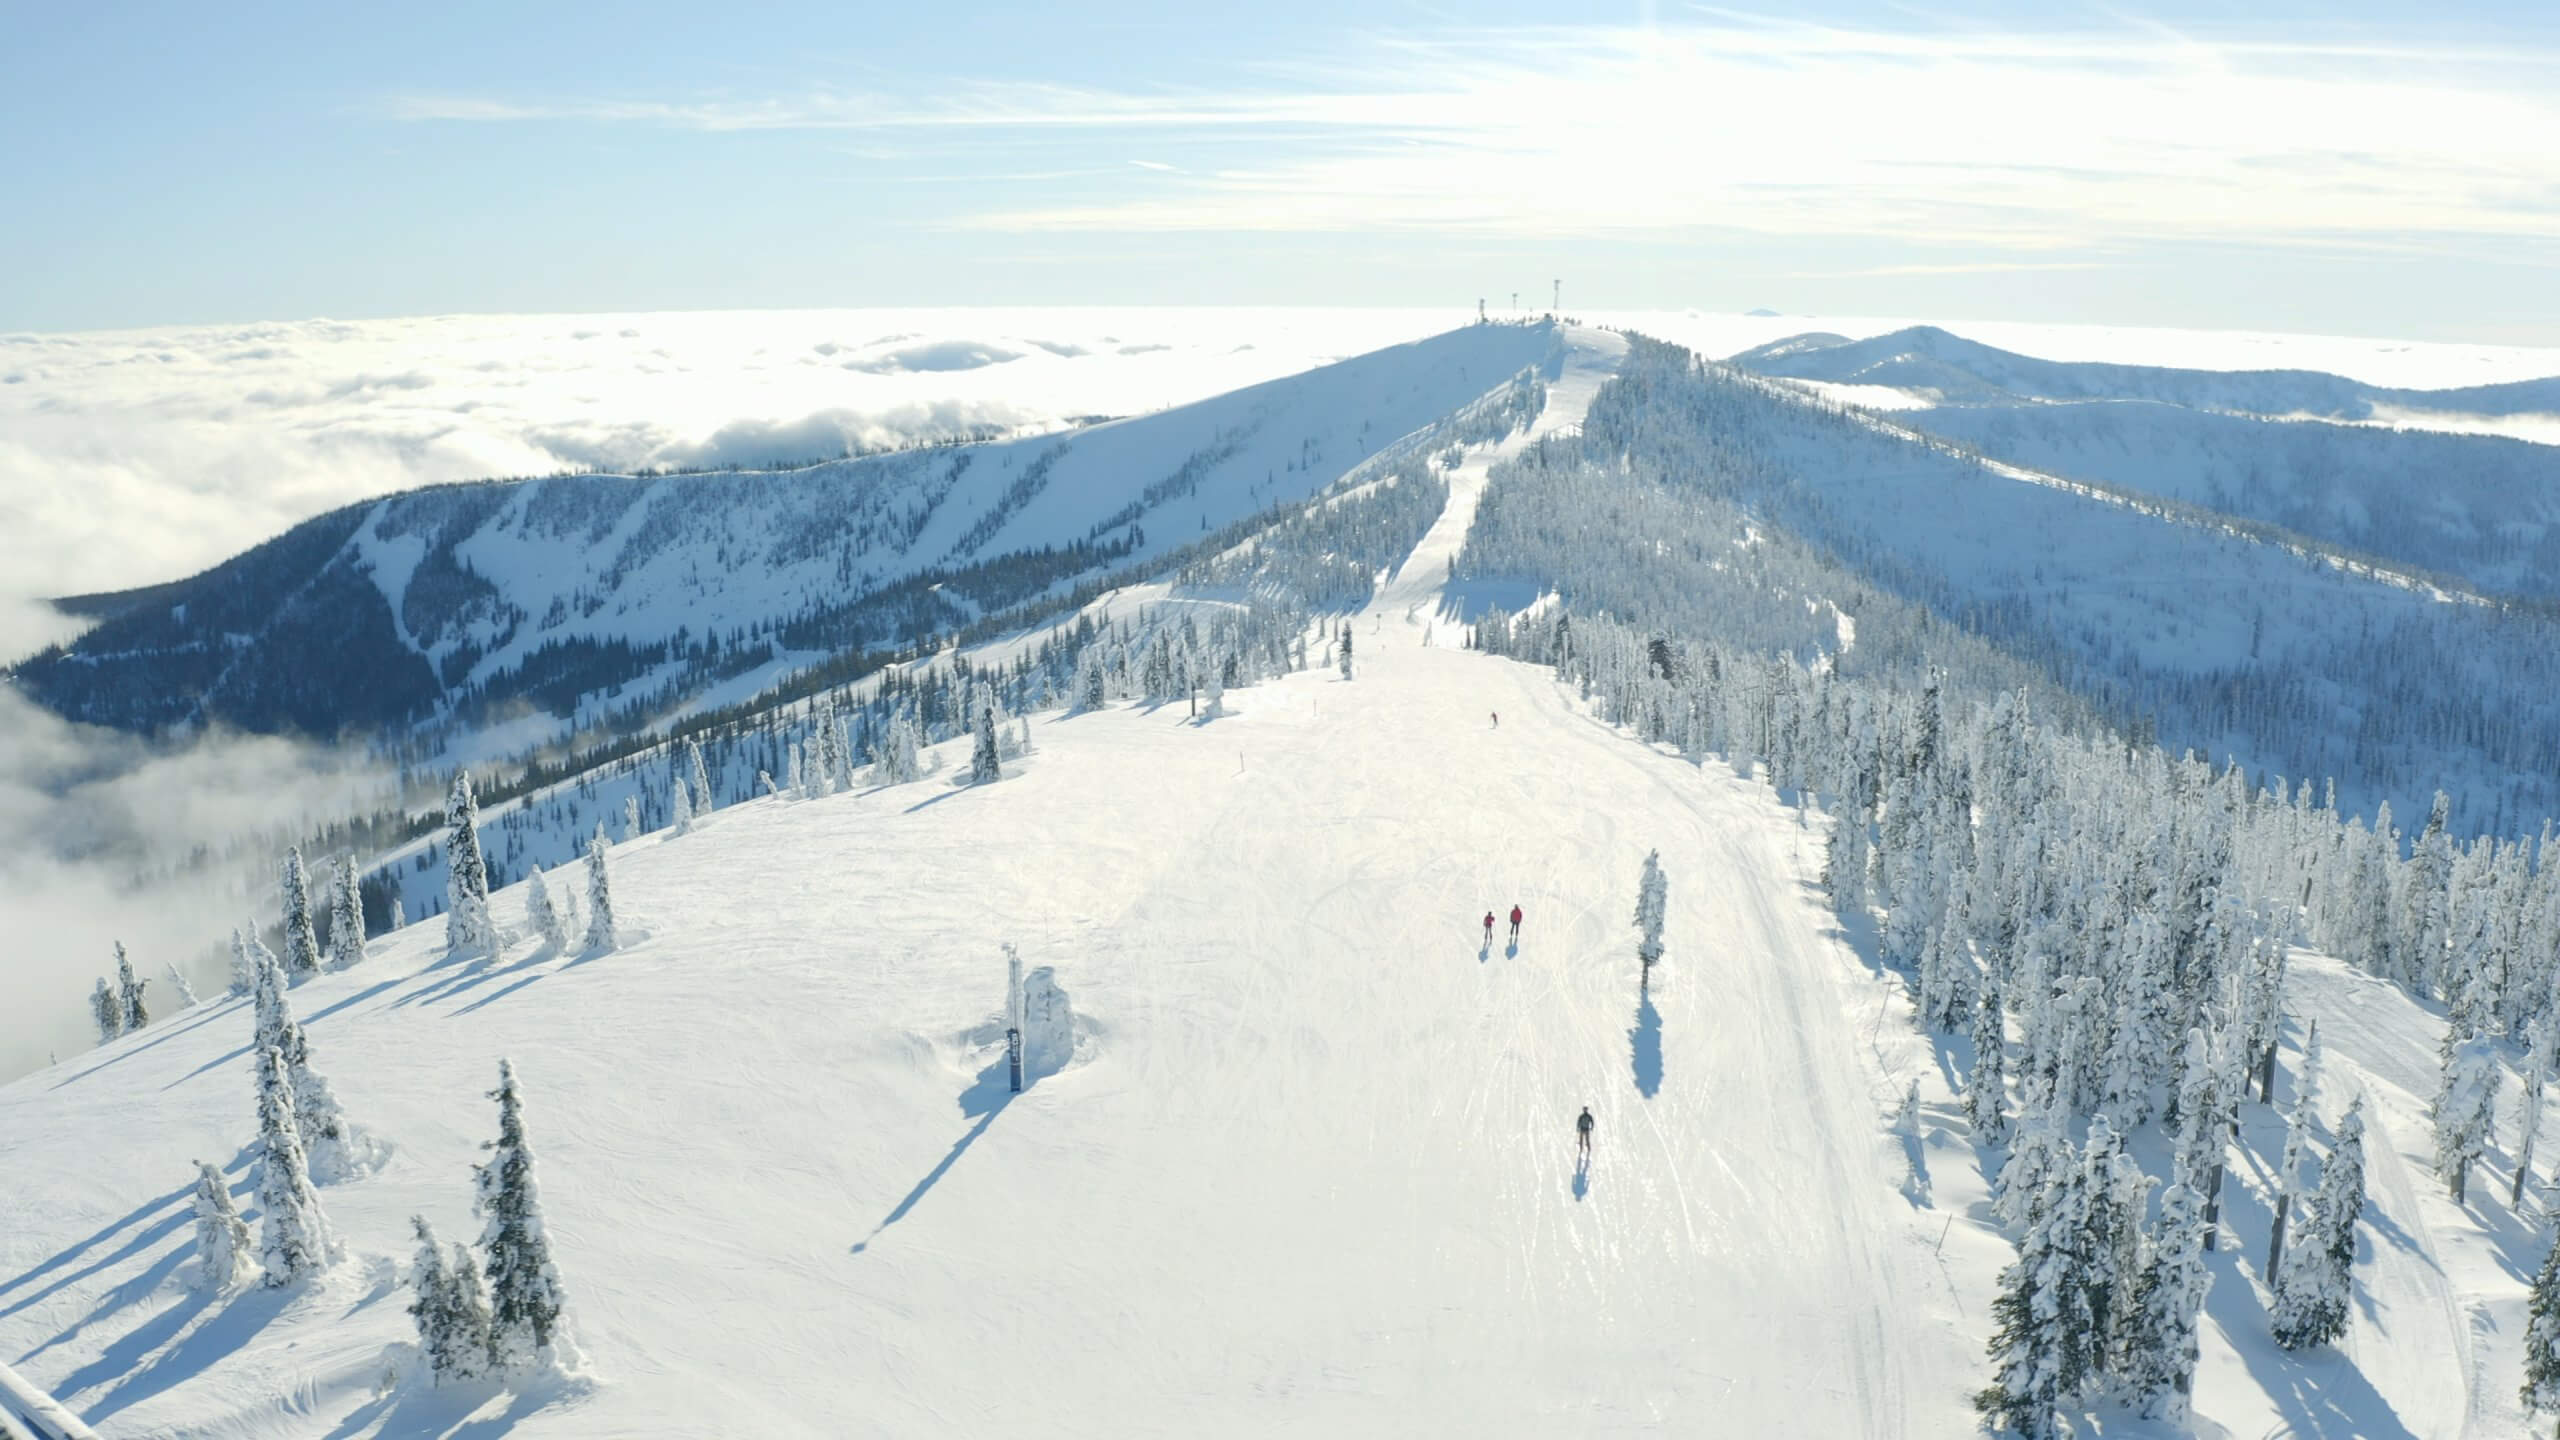 Aerial view of people skiing down a snowy mountain.